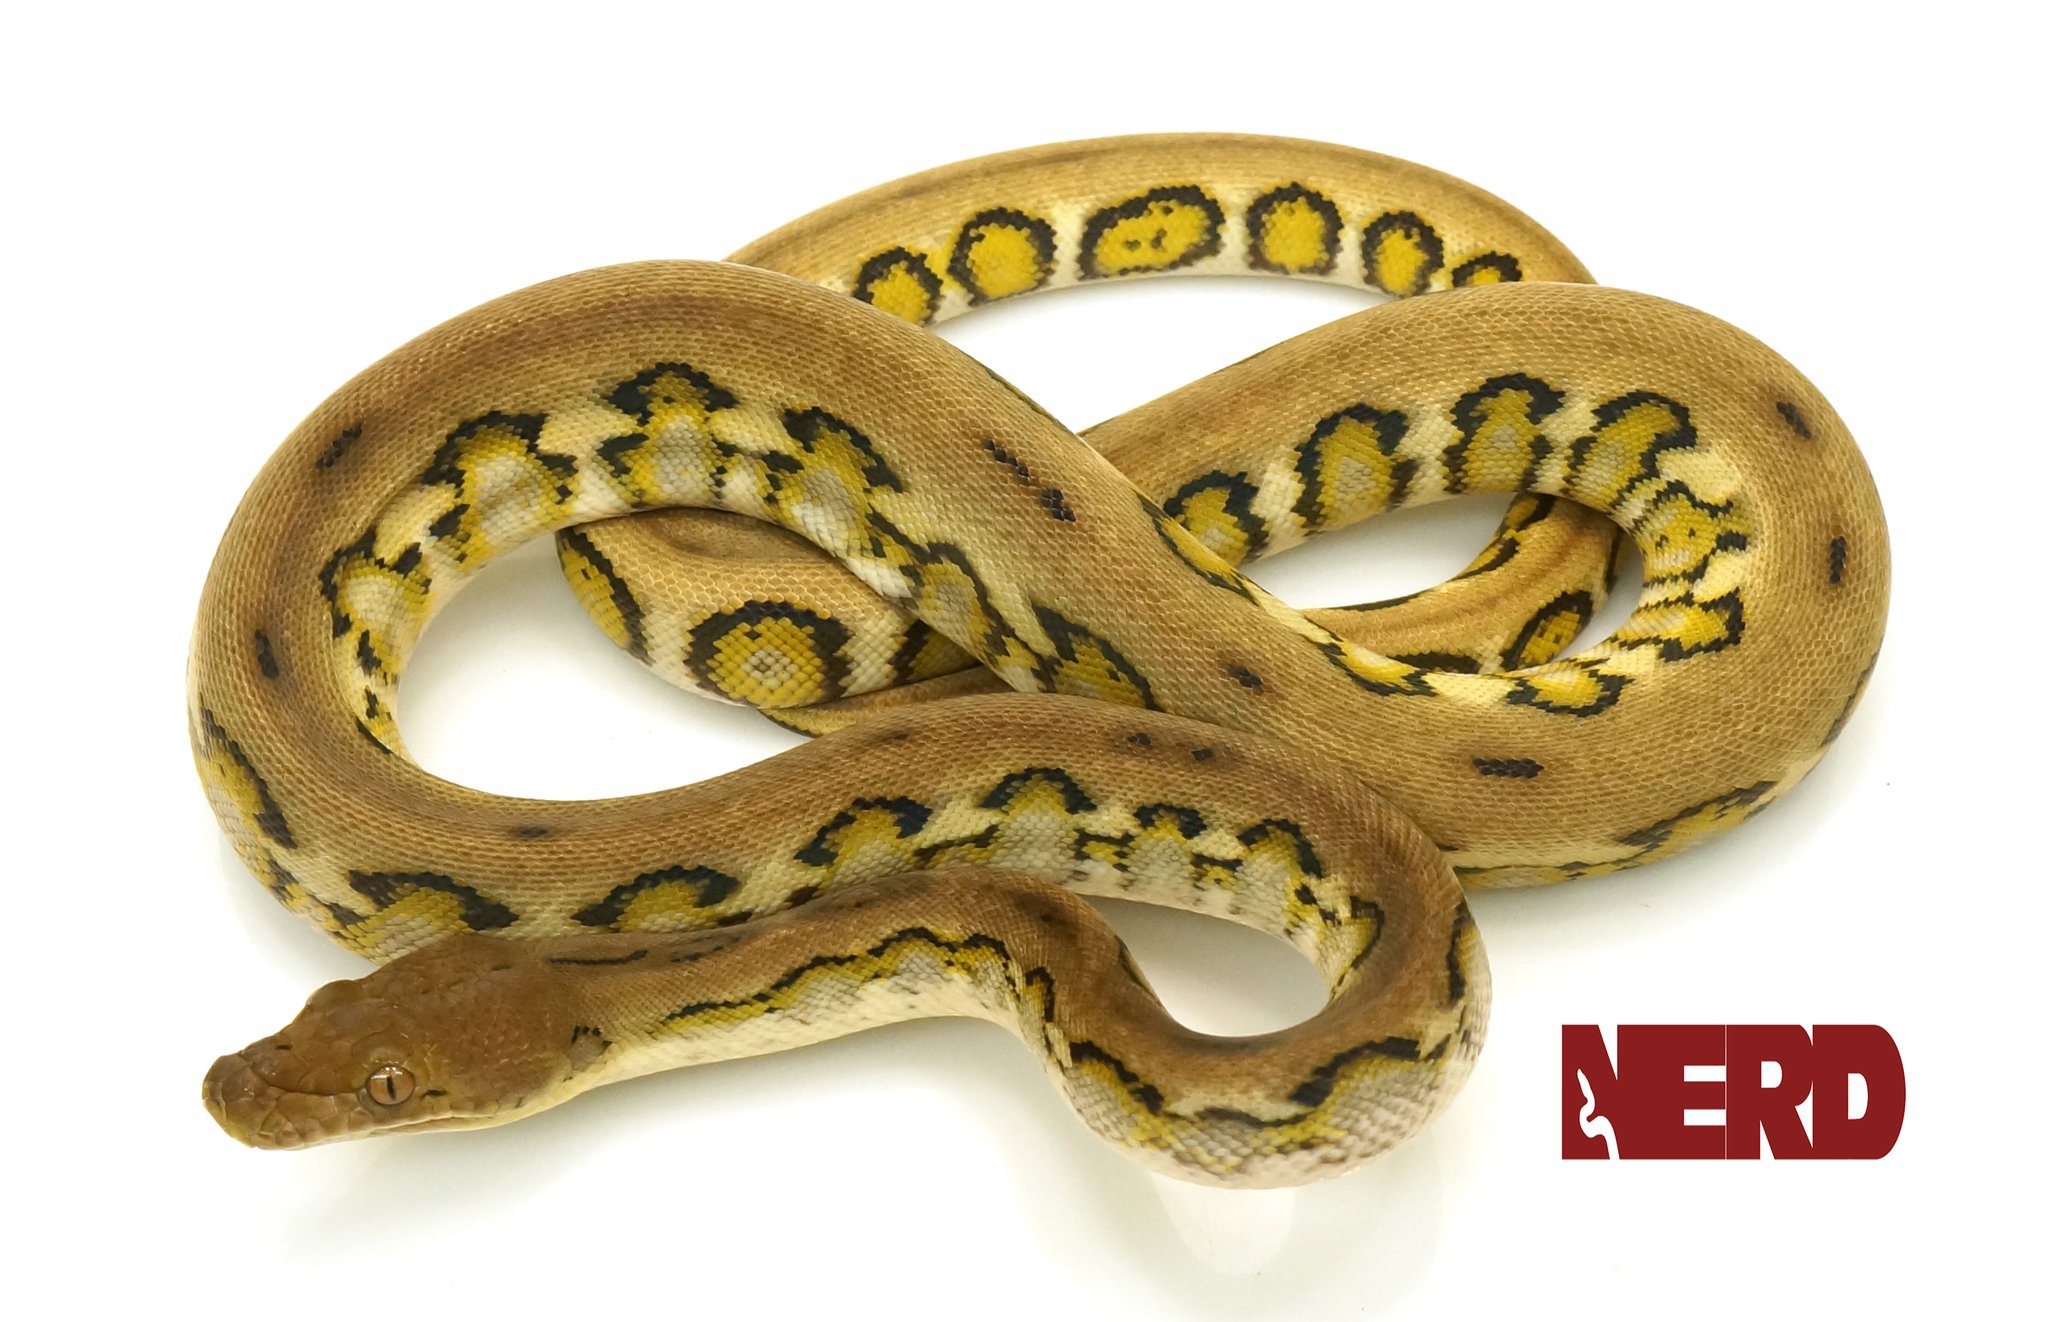 Jaguar Reticulated Python by New England Reptile Distributors